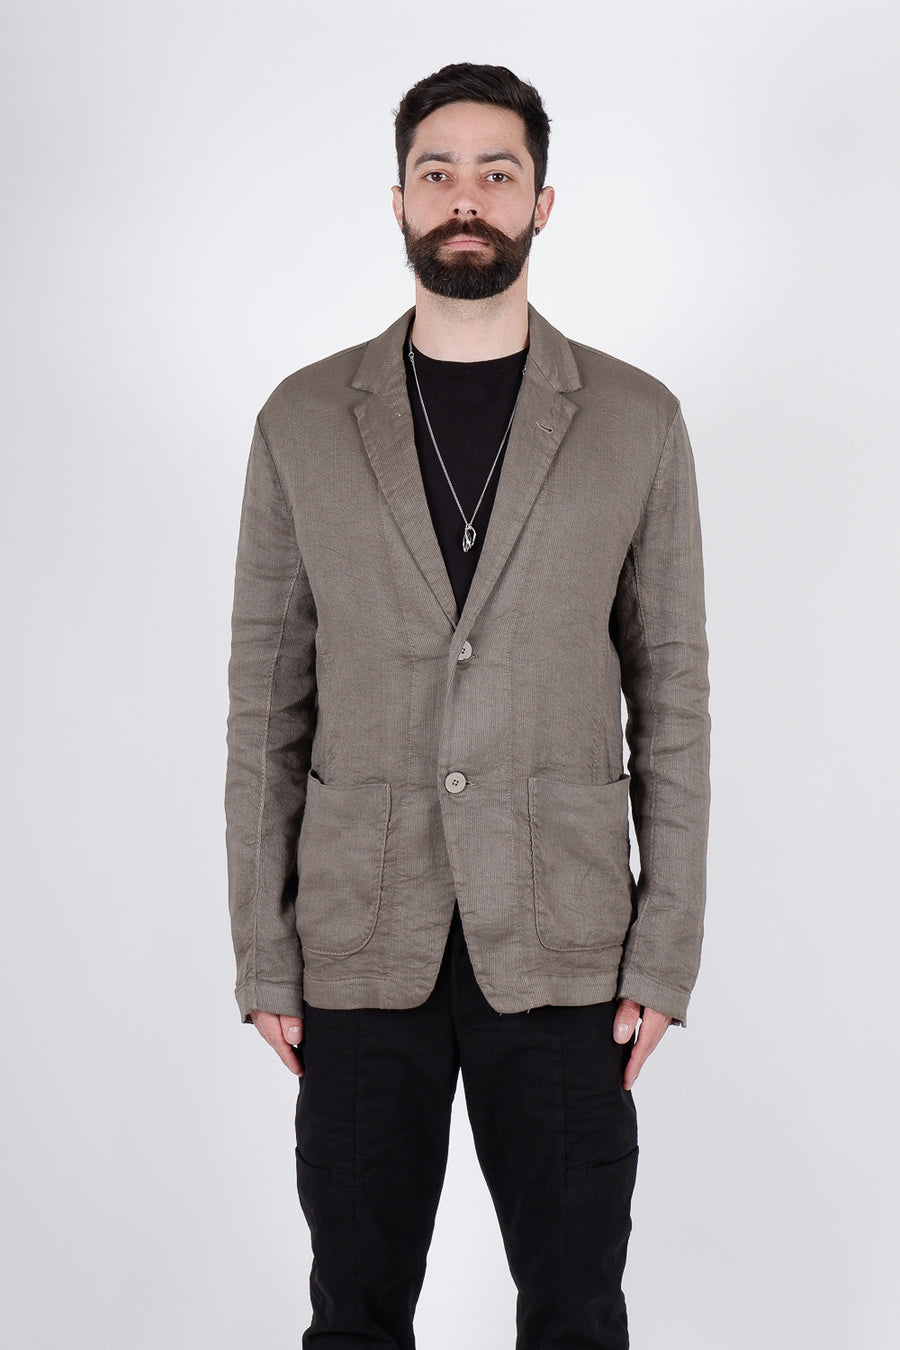 Buy the Transit Regular Fit Linen Blazer in Steel at Intro. Spend £50 for free UK delivery. Official stockists. We ship worldwide.